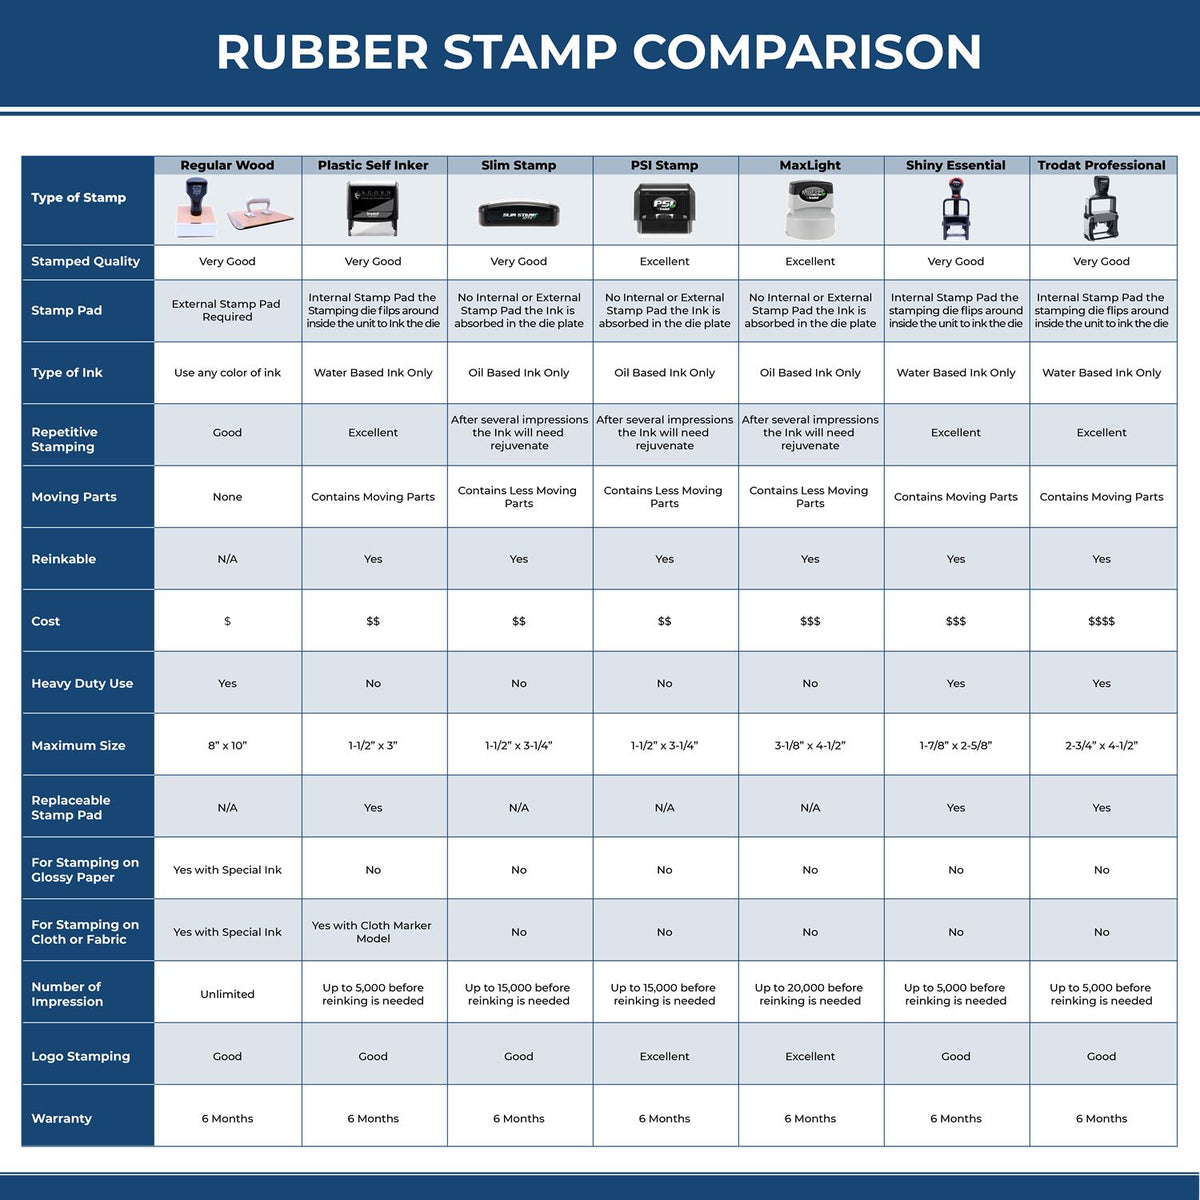 A comparison chart for the different types of mount models available for the Self-Inking Pennsylvania PE Stamp.